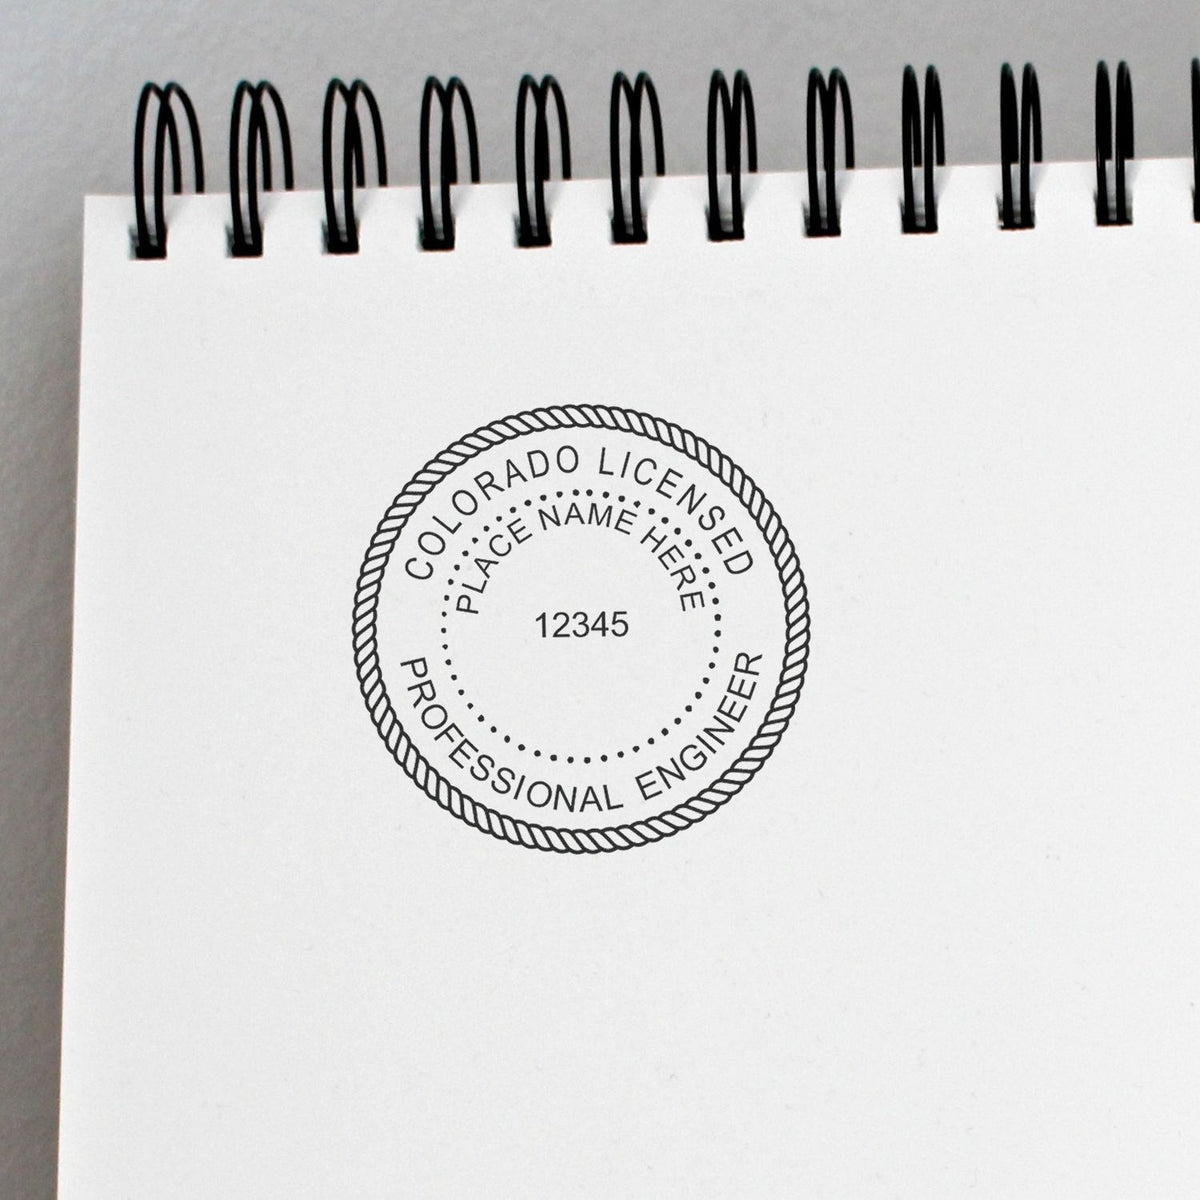 The Premium MaxLight Pre-Inked Colorado Engineering Stamp stamp impression comes to life with a crisp, detailed photo on paper - showcasing true professional quality.